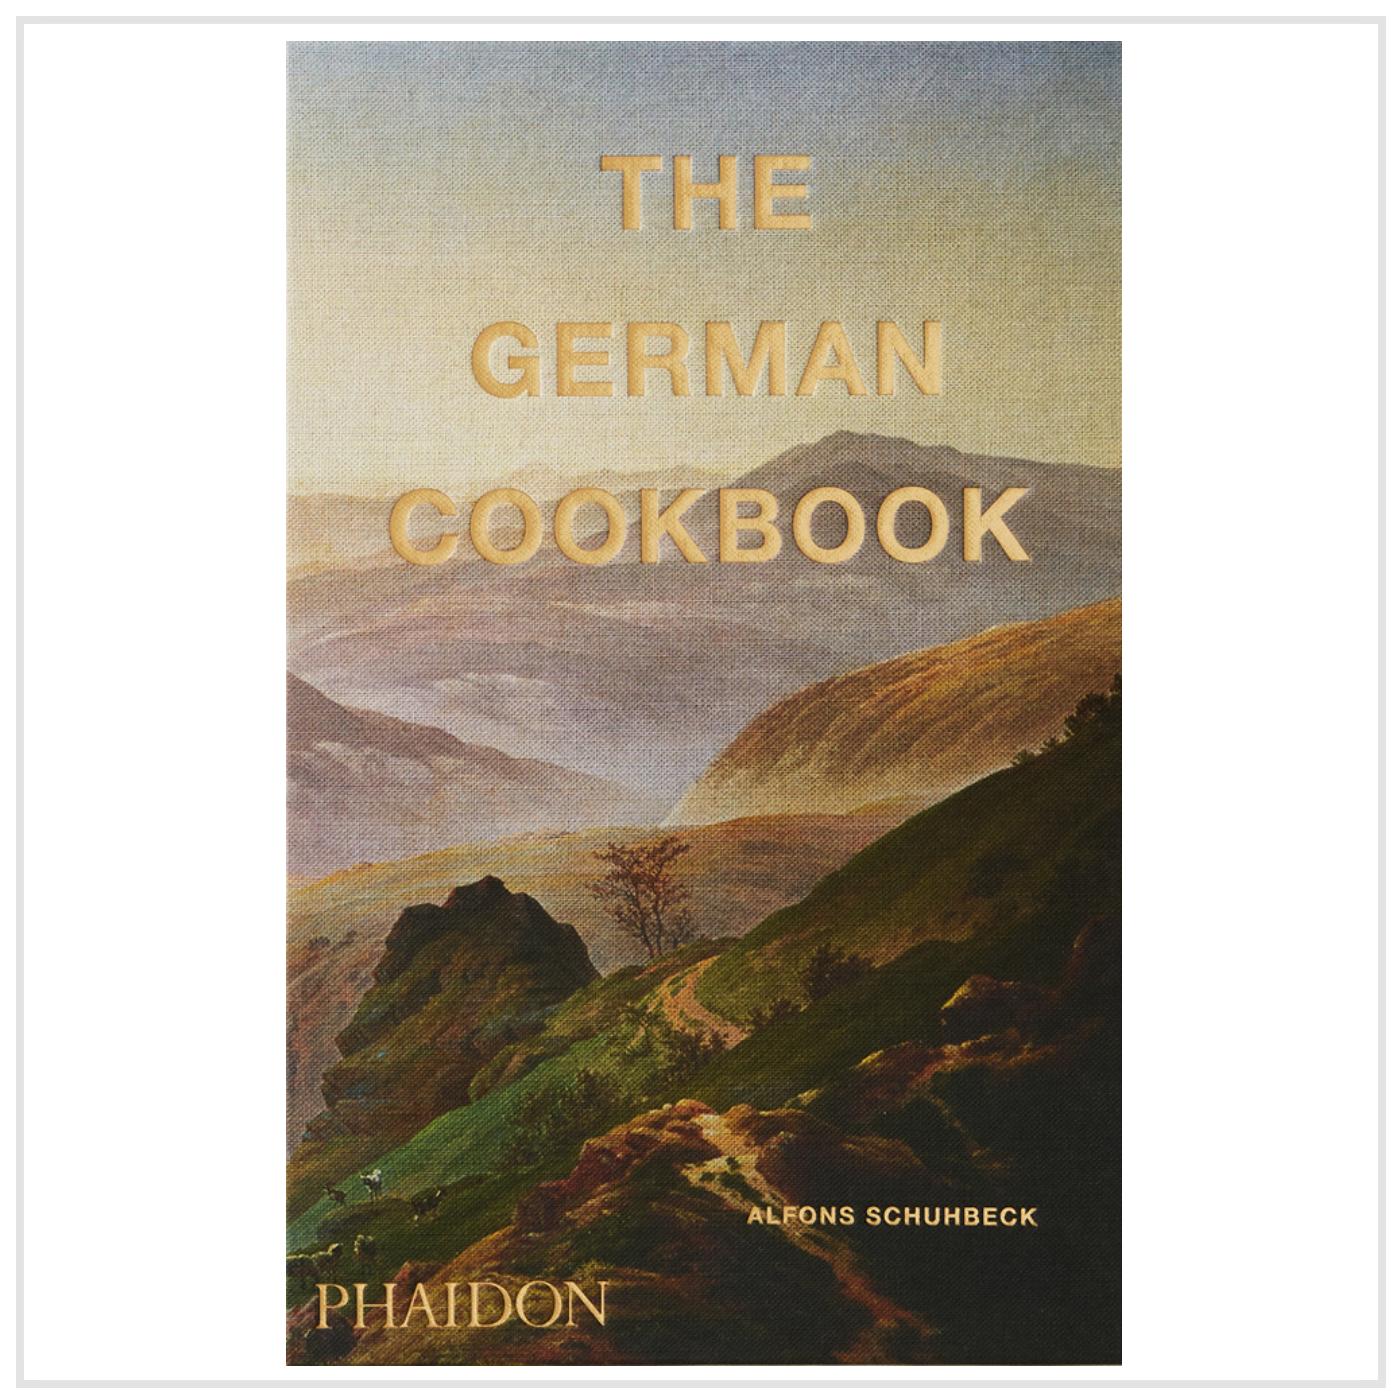 The German Cookbook by Phaidon